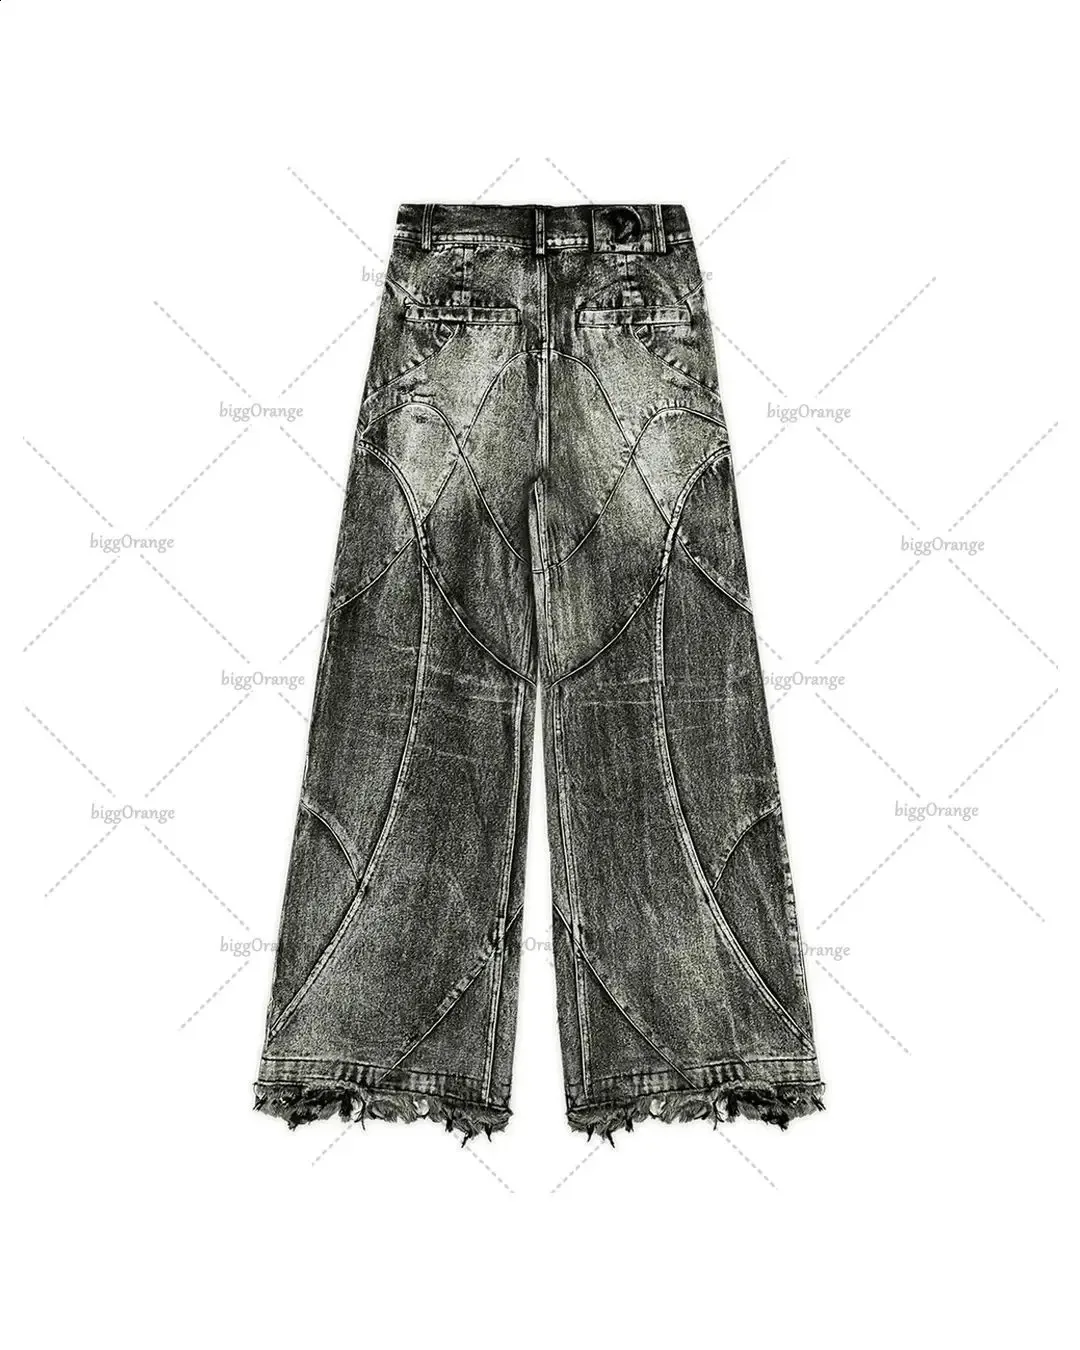 Men's Jeans Y2K Destroyed Stitching Jeans Men's Black Washed Jeans Gothic  Style Street Trend Clothing Retro Loose Wide Leg Pants Fall Guys 231116